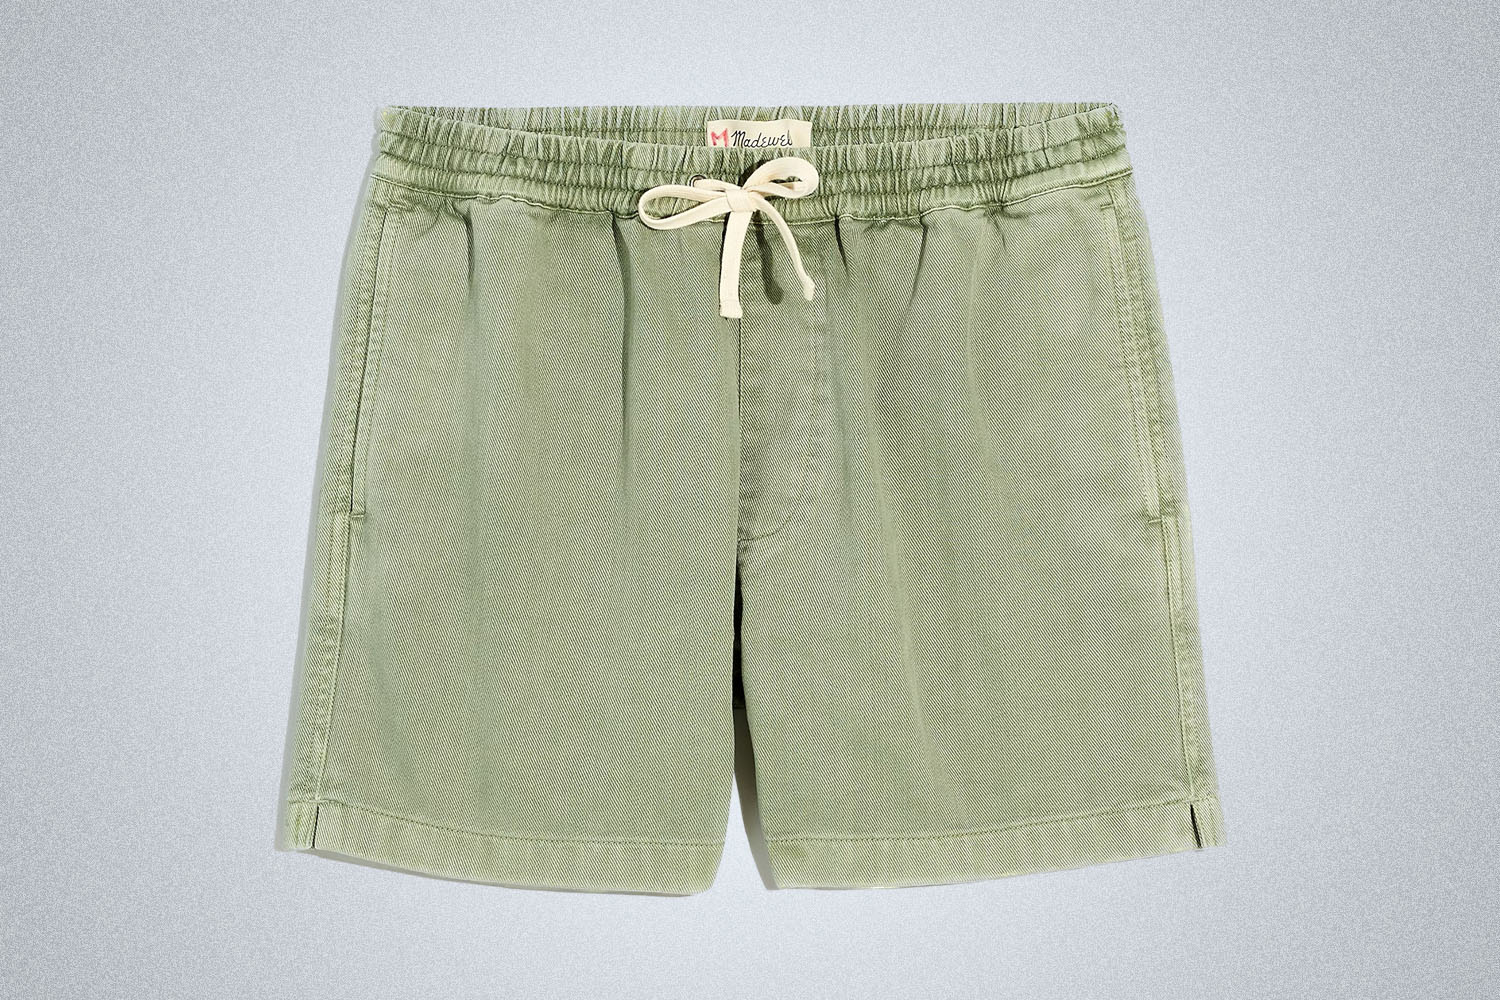 10 Great Pairs of Shorts, None of Them Over 5 Inches in Length